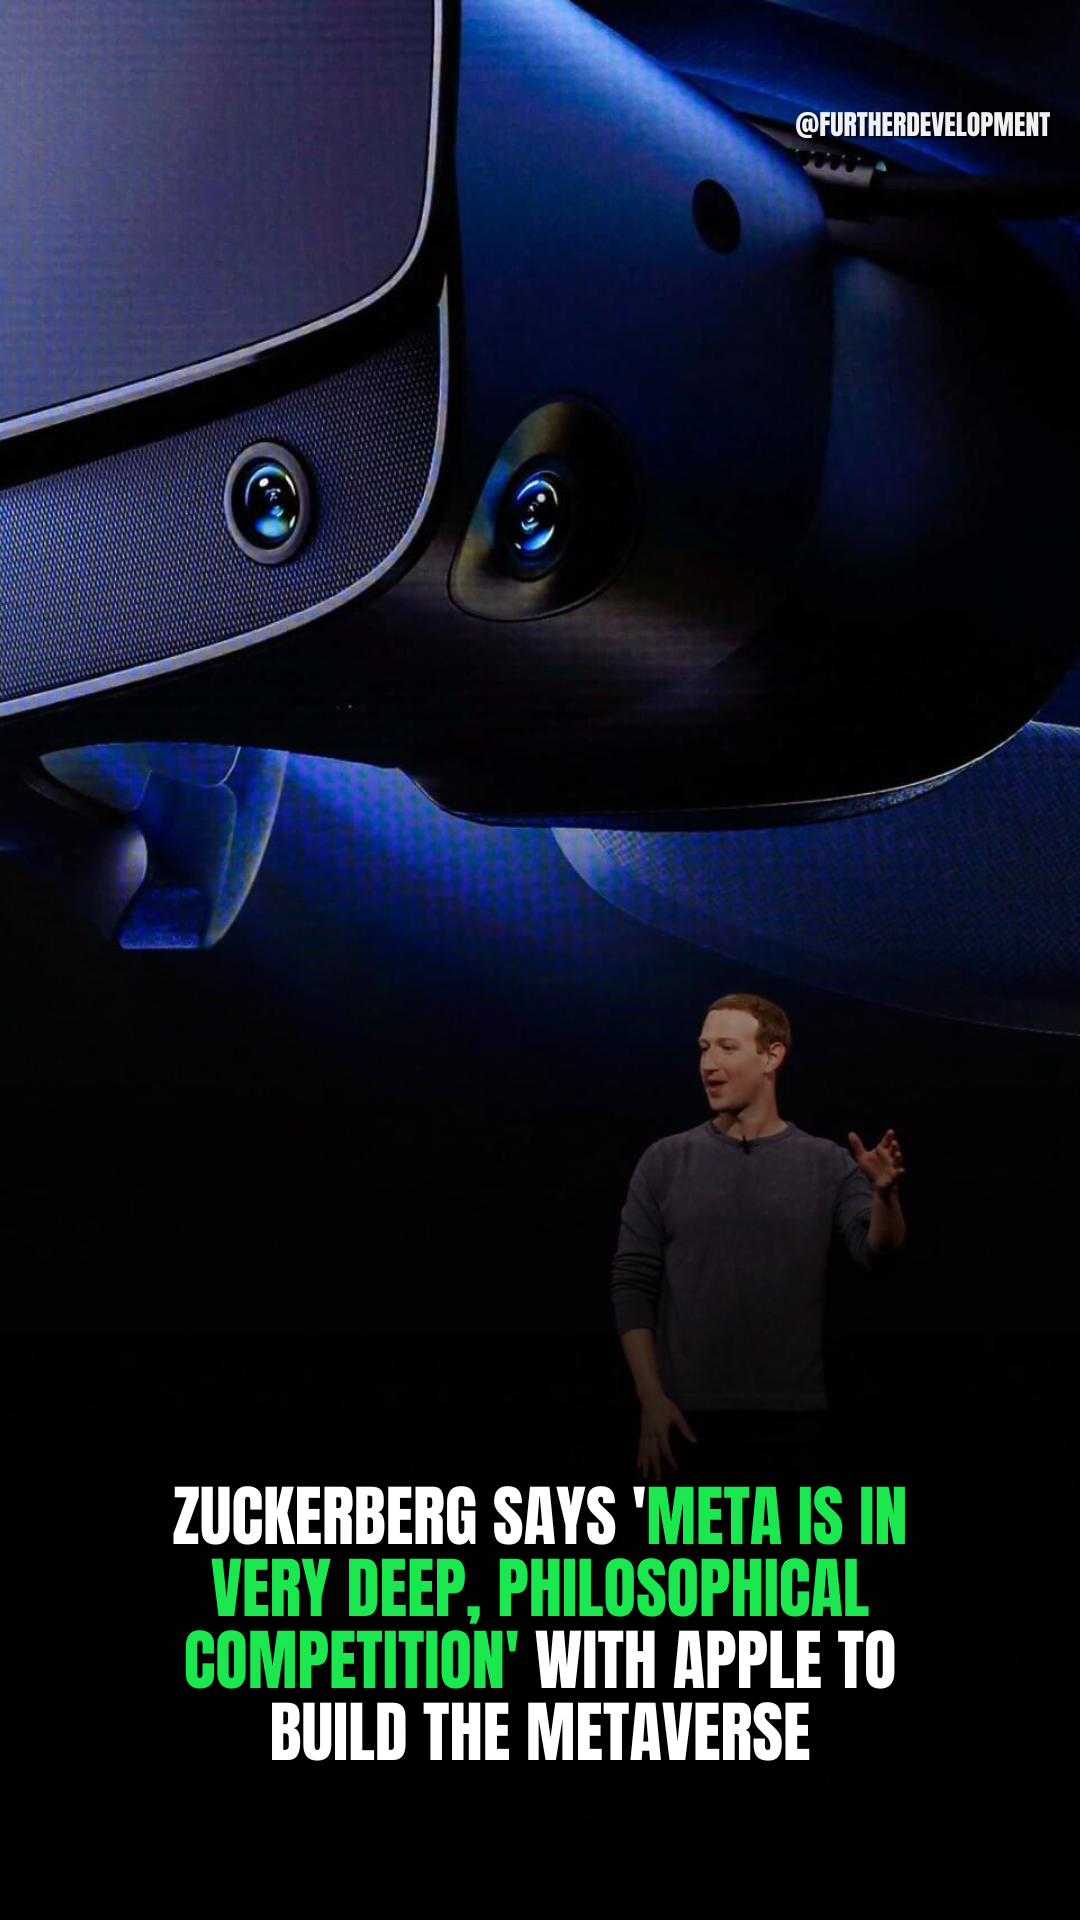 ZUCKERBERG SAYS 'META IS IN VERY DEEP, PHILOSOPHICAL COMPETITION' WITH APPLE TO BUILD THE METAVERSE